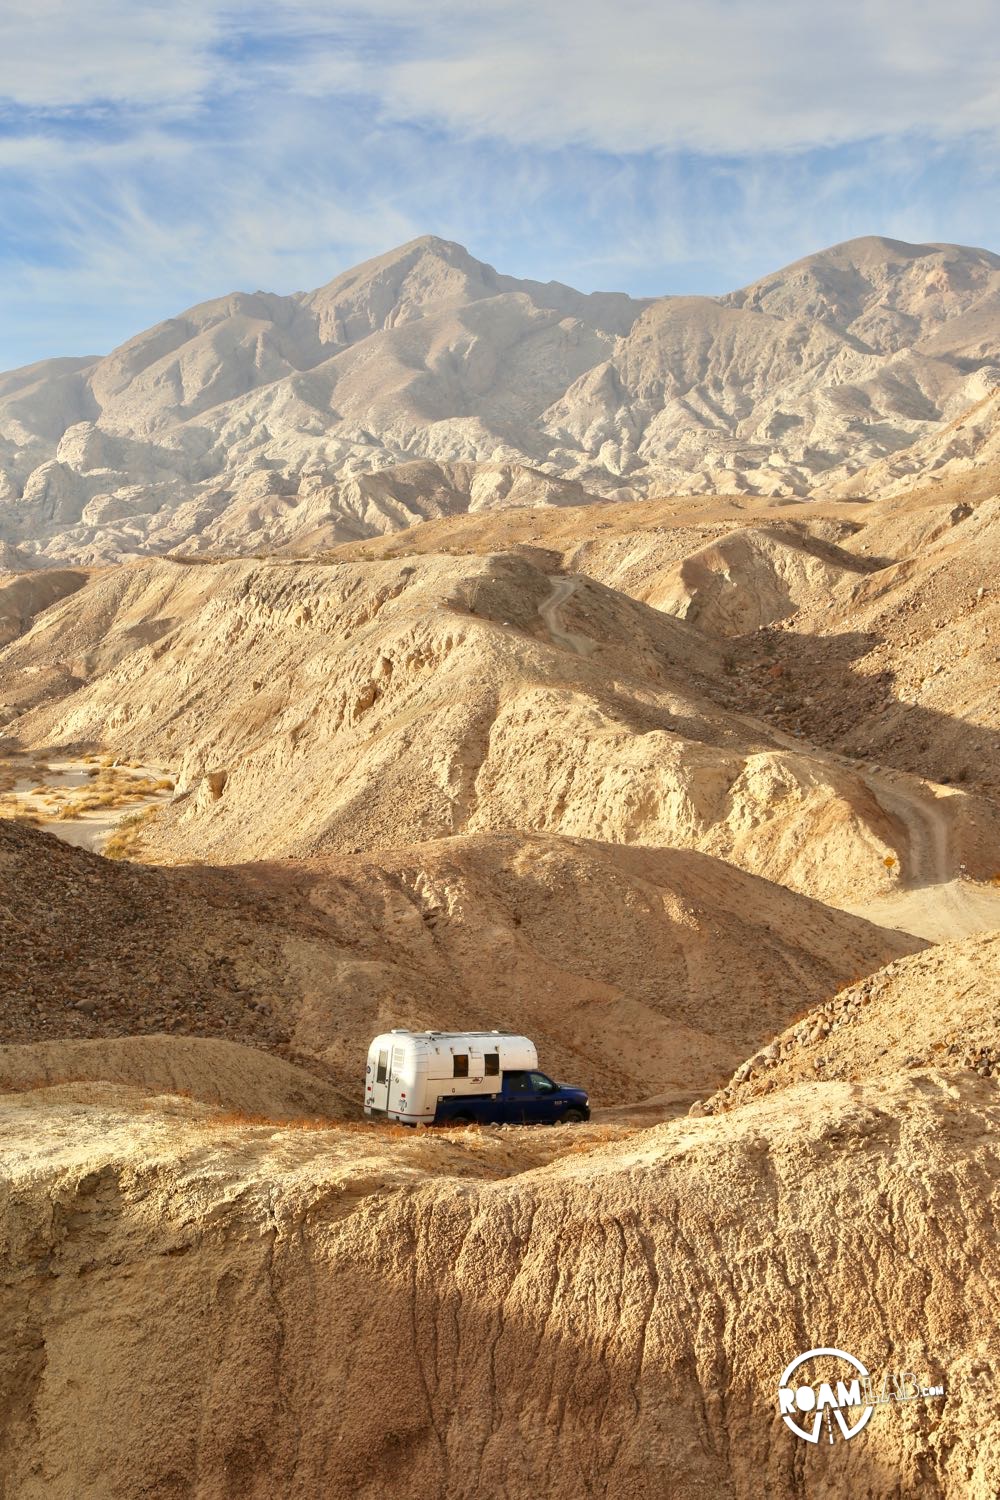 Descending into a wash with our Avion Ultra C11 truck camper on the way to Palm Slot Canyon in Anza-Borrego Desert State Park